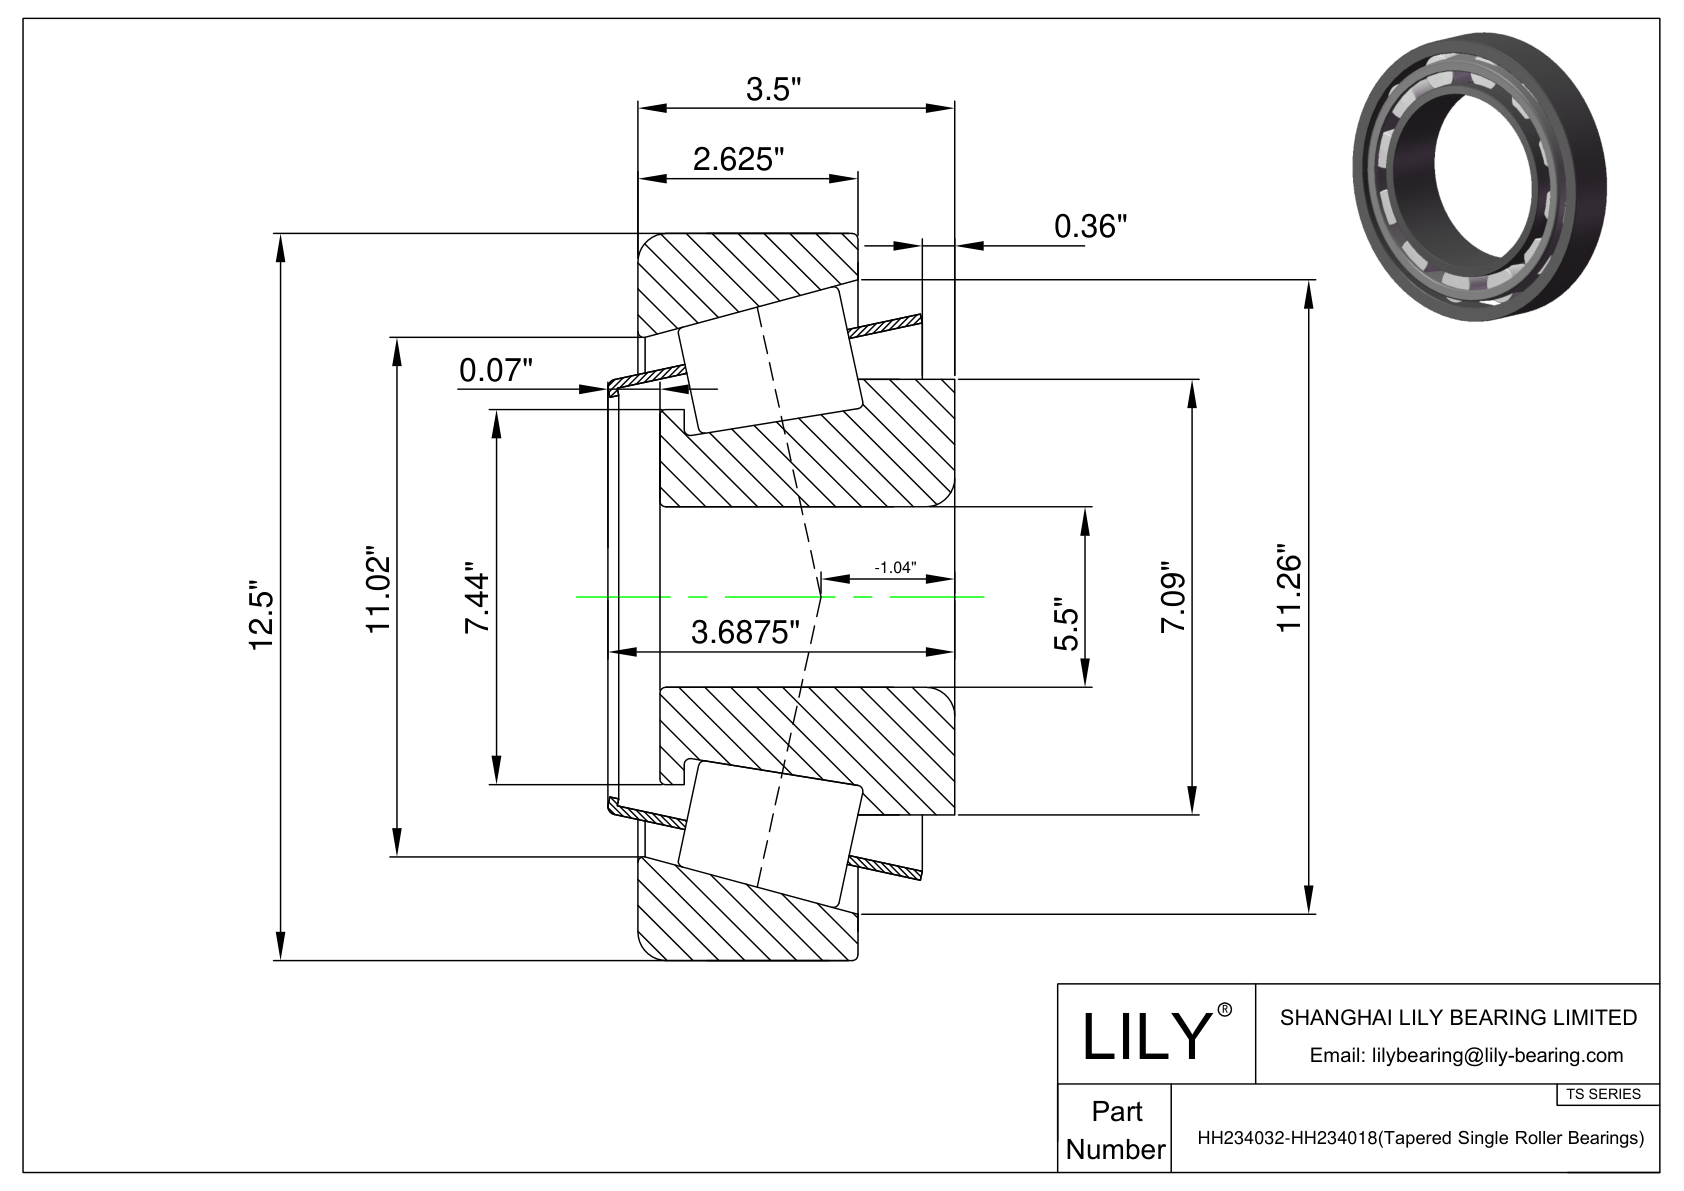 HH234032-HH234018 TS (Tapered Single Roller Bearings) (Imperial) cad drawing